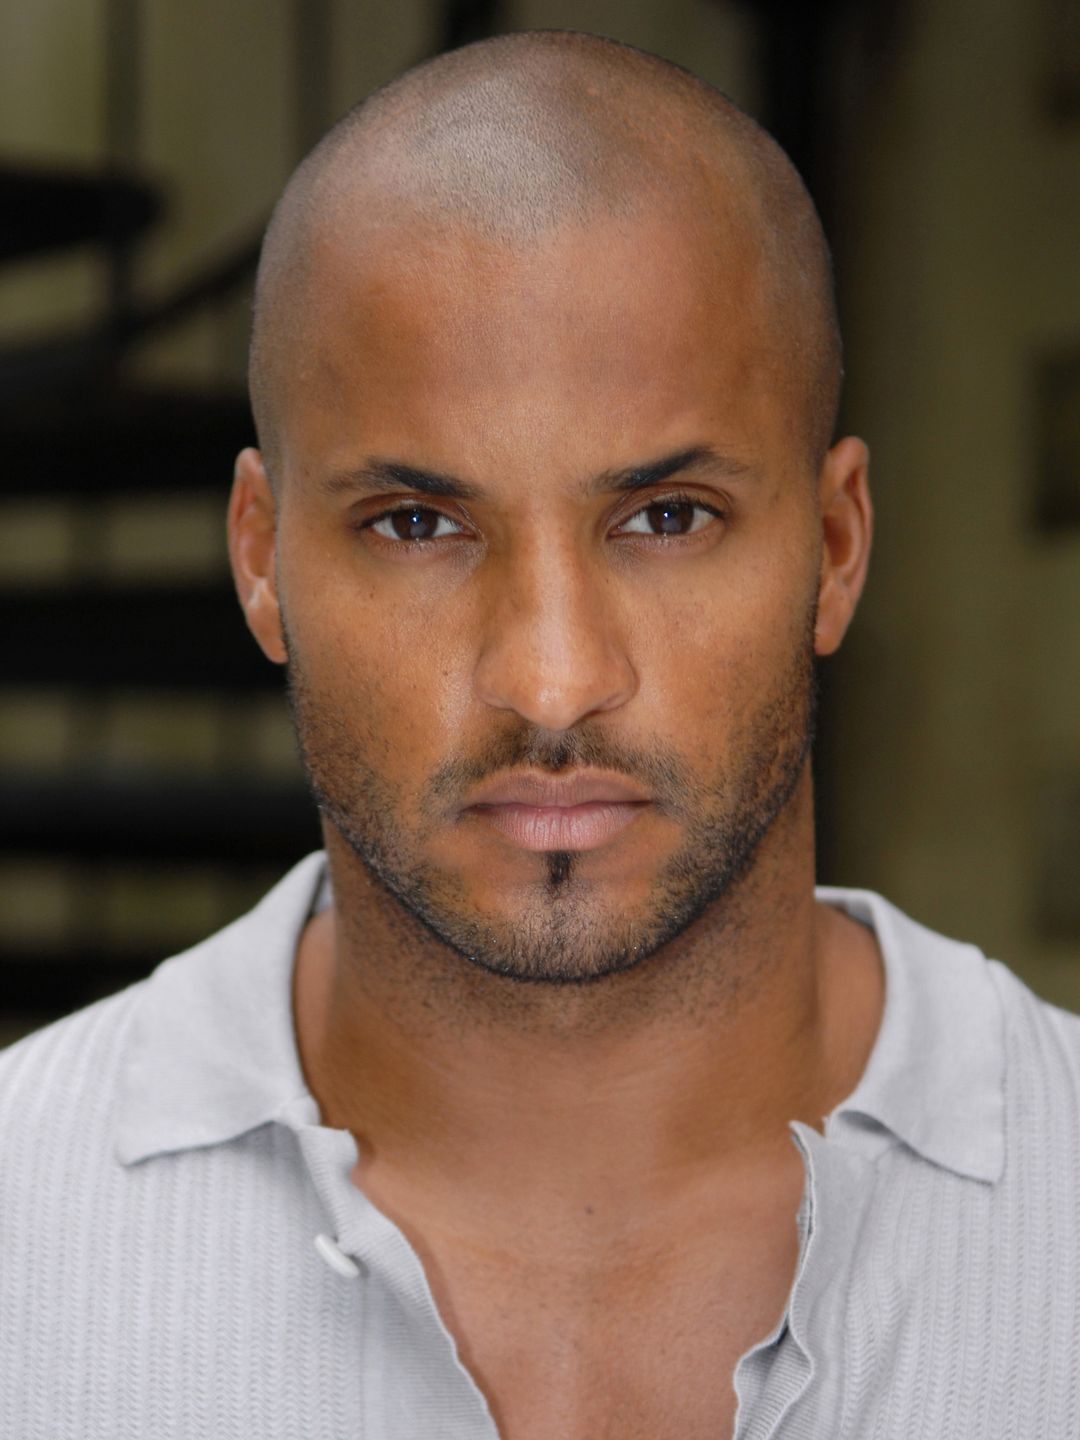 Ricky Whittle early life